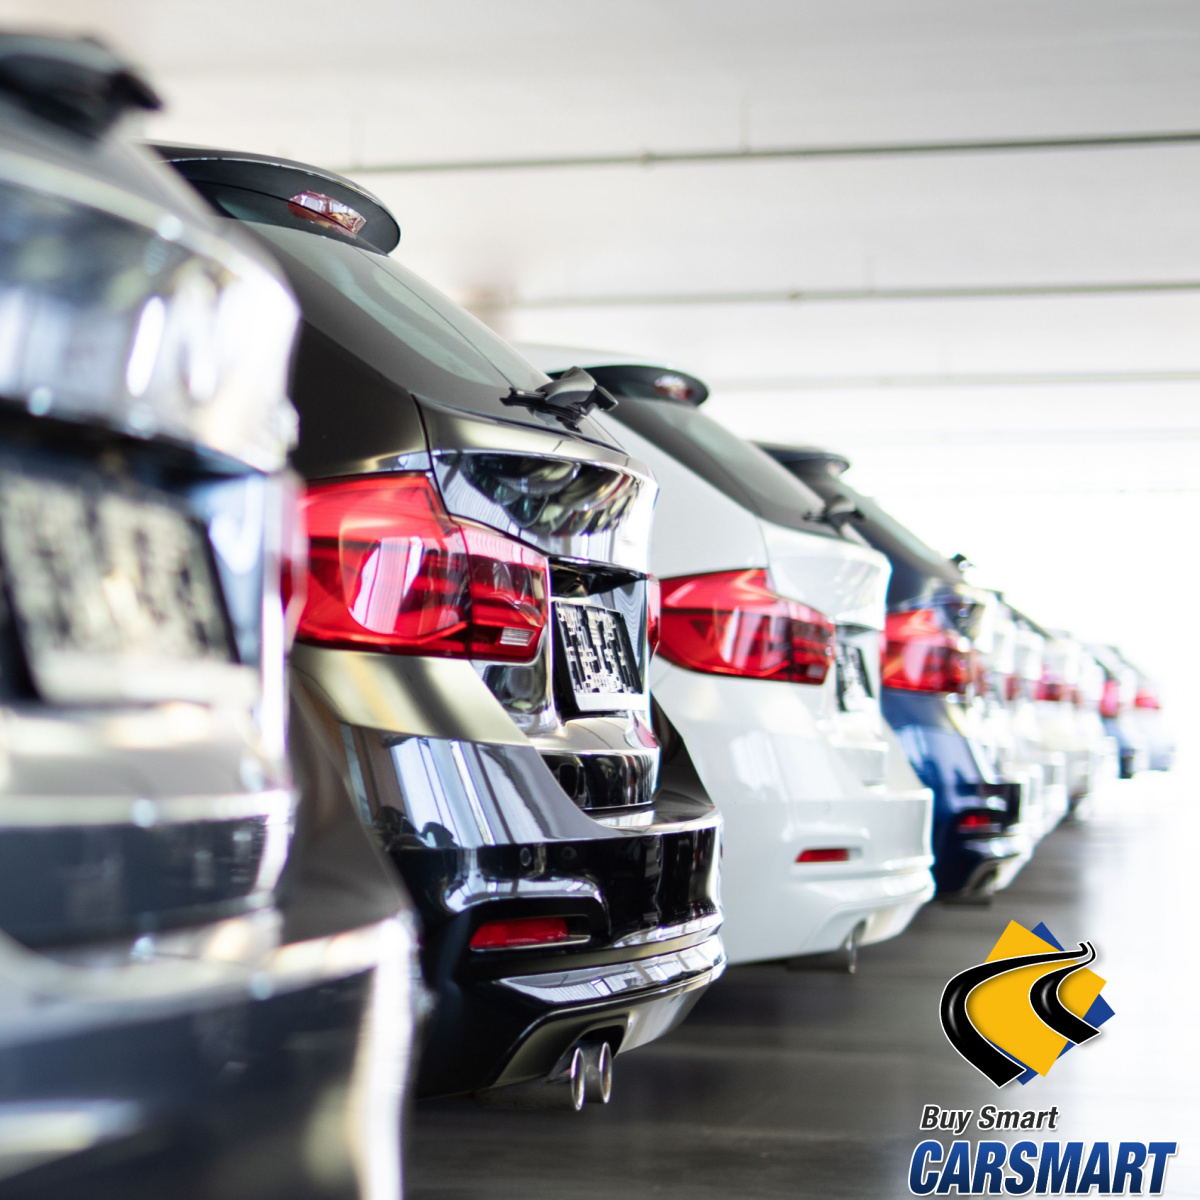 CarSmart Has a Quality Selection of Used Cars for Alexandria Drivers!